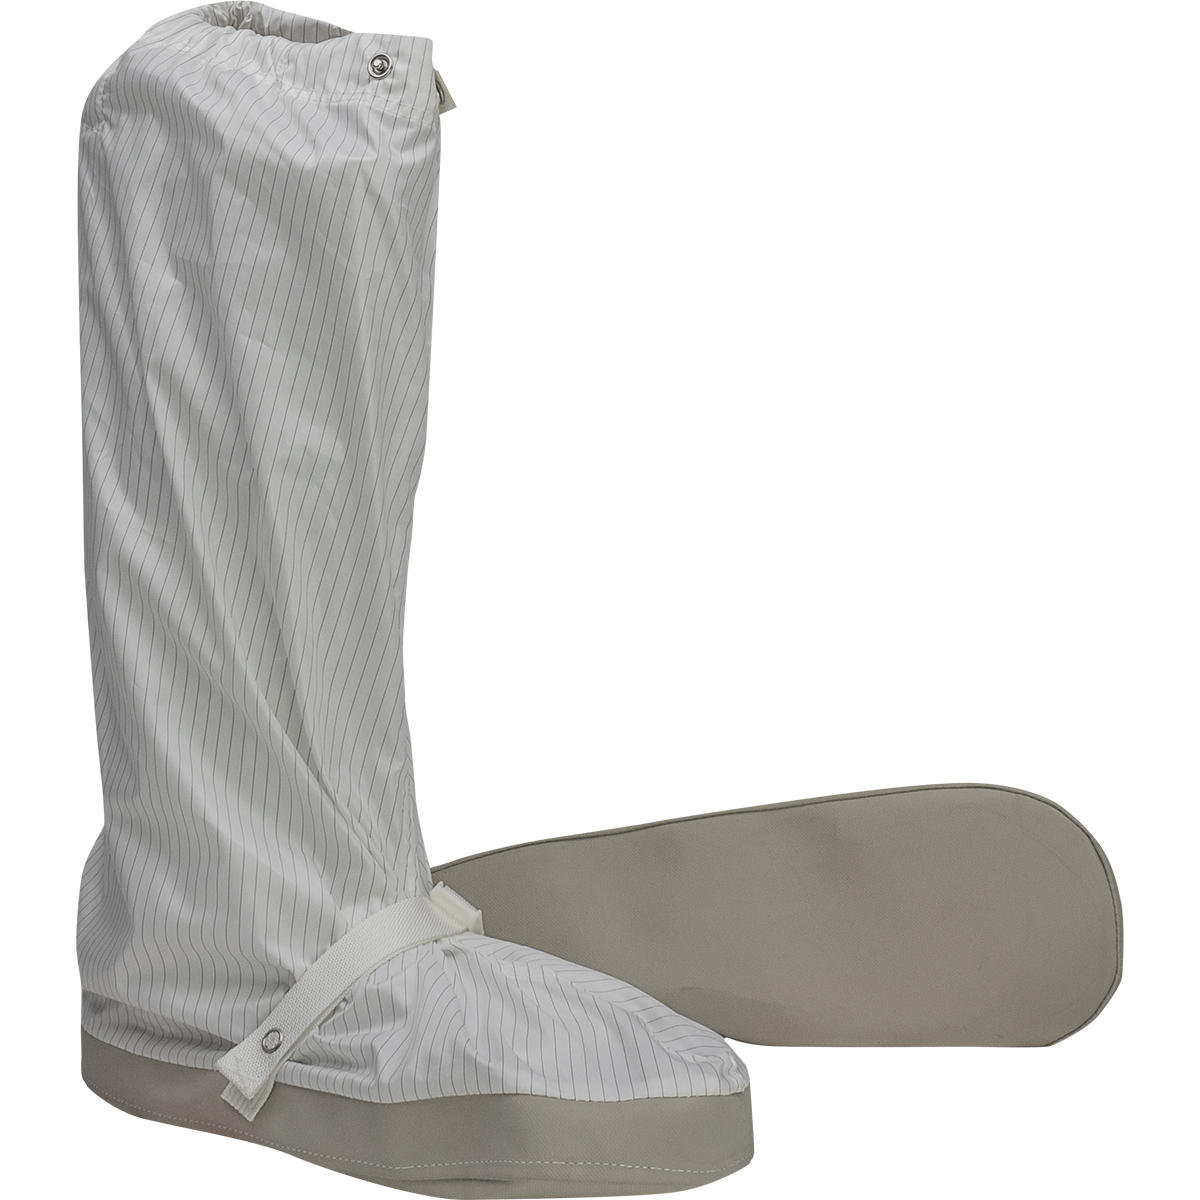 CB2-16WH Uniform Technology™ Ultimax Stripe ISO 3 (Class 1) Cleanroom Boots